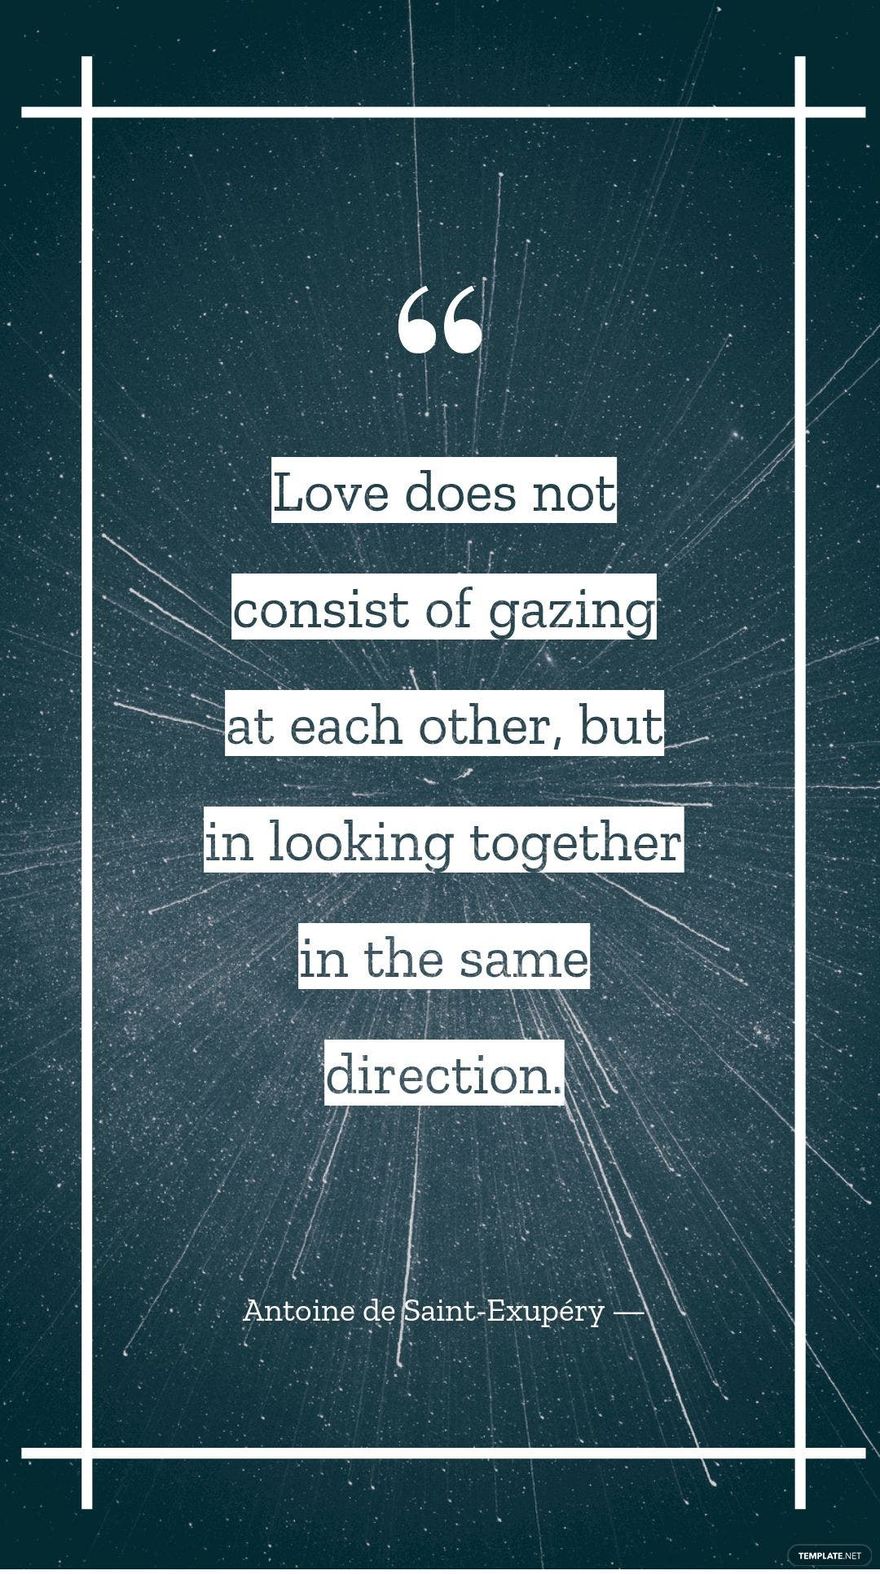 Antoine de Saint-Exupéry — “Love does not consist of gazing at each other, but in looking together in the same direction.”